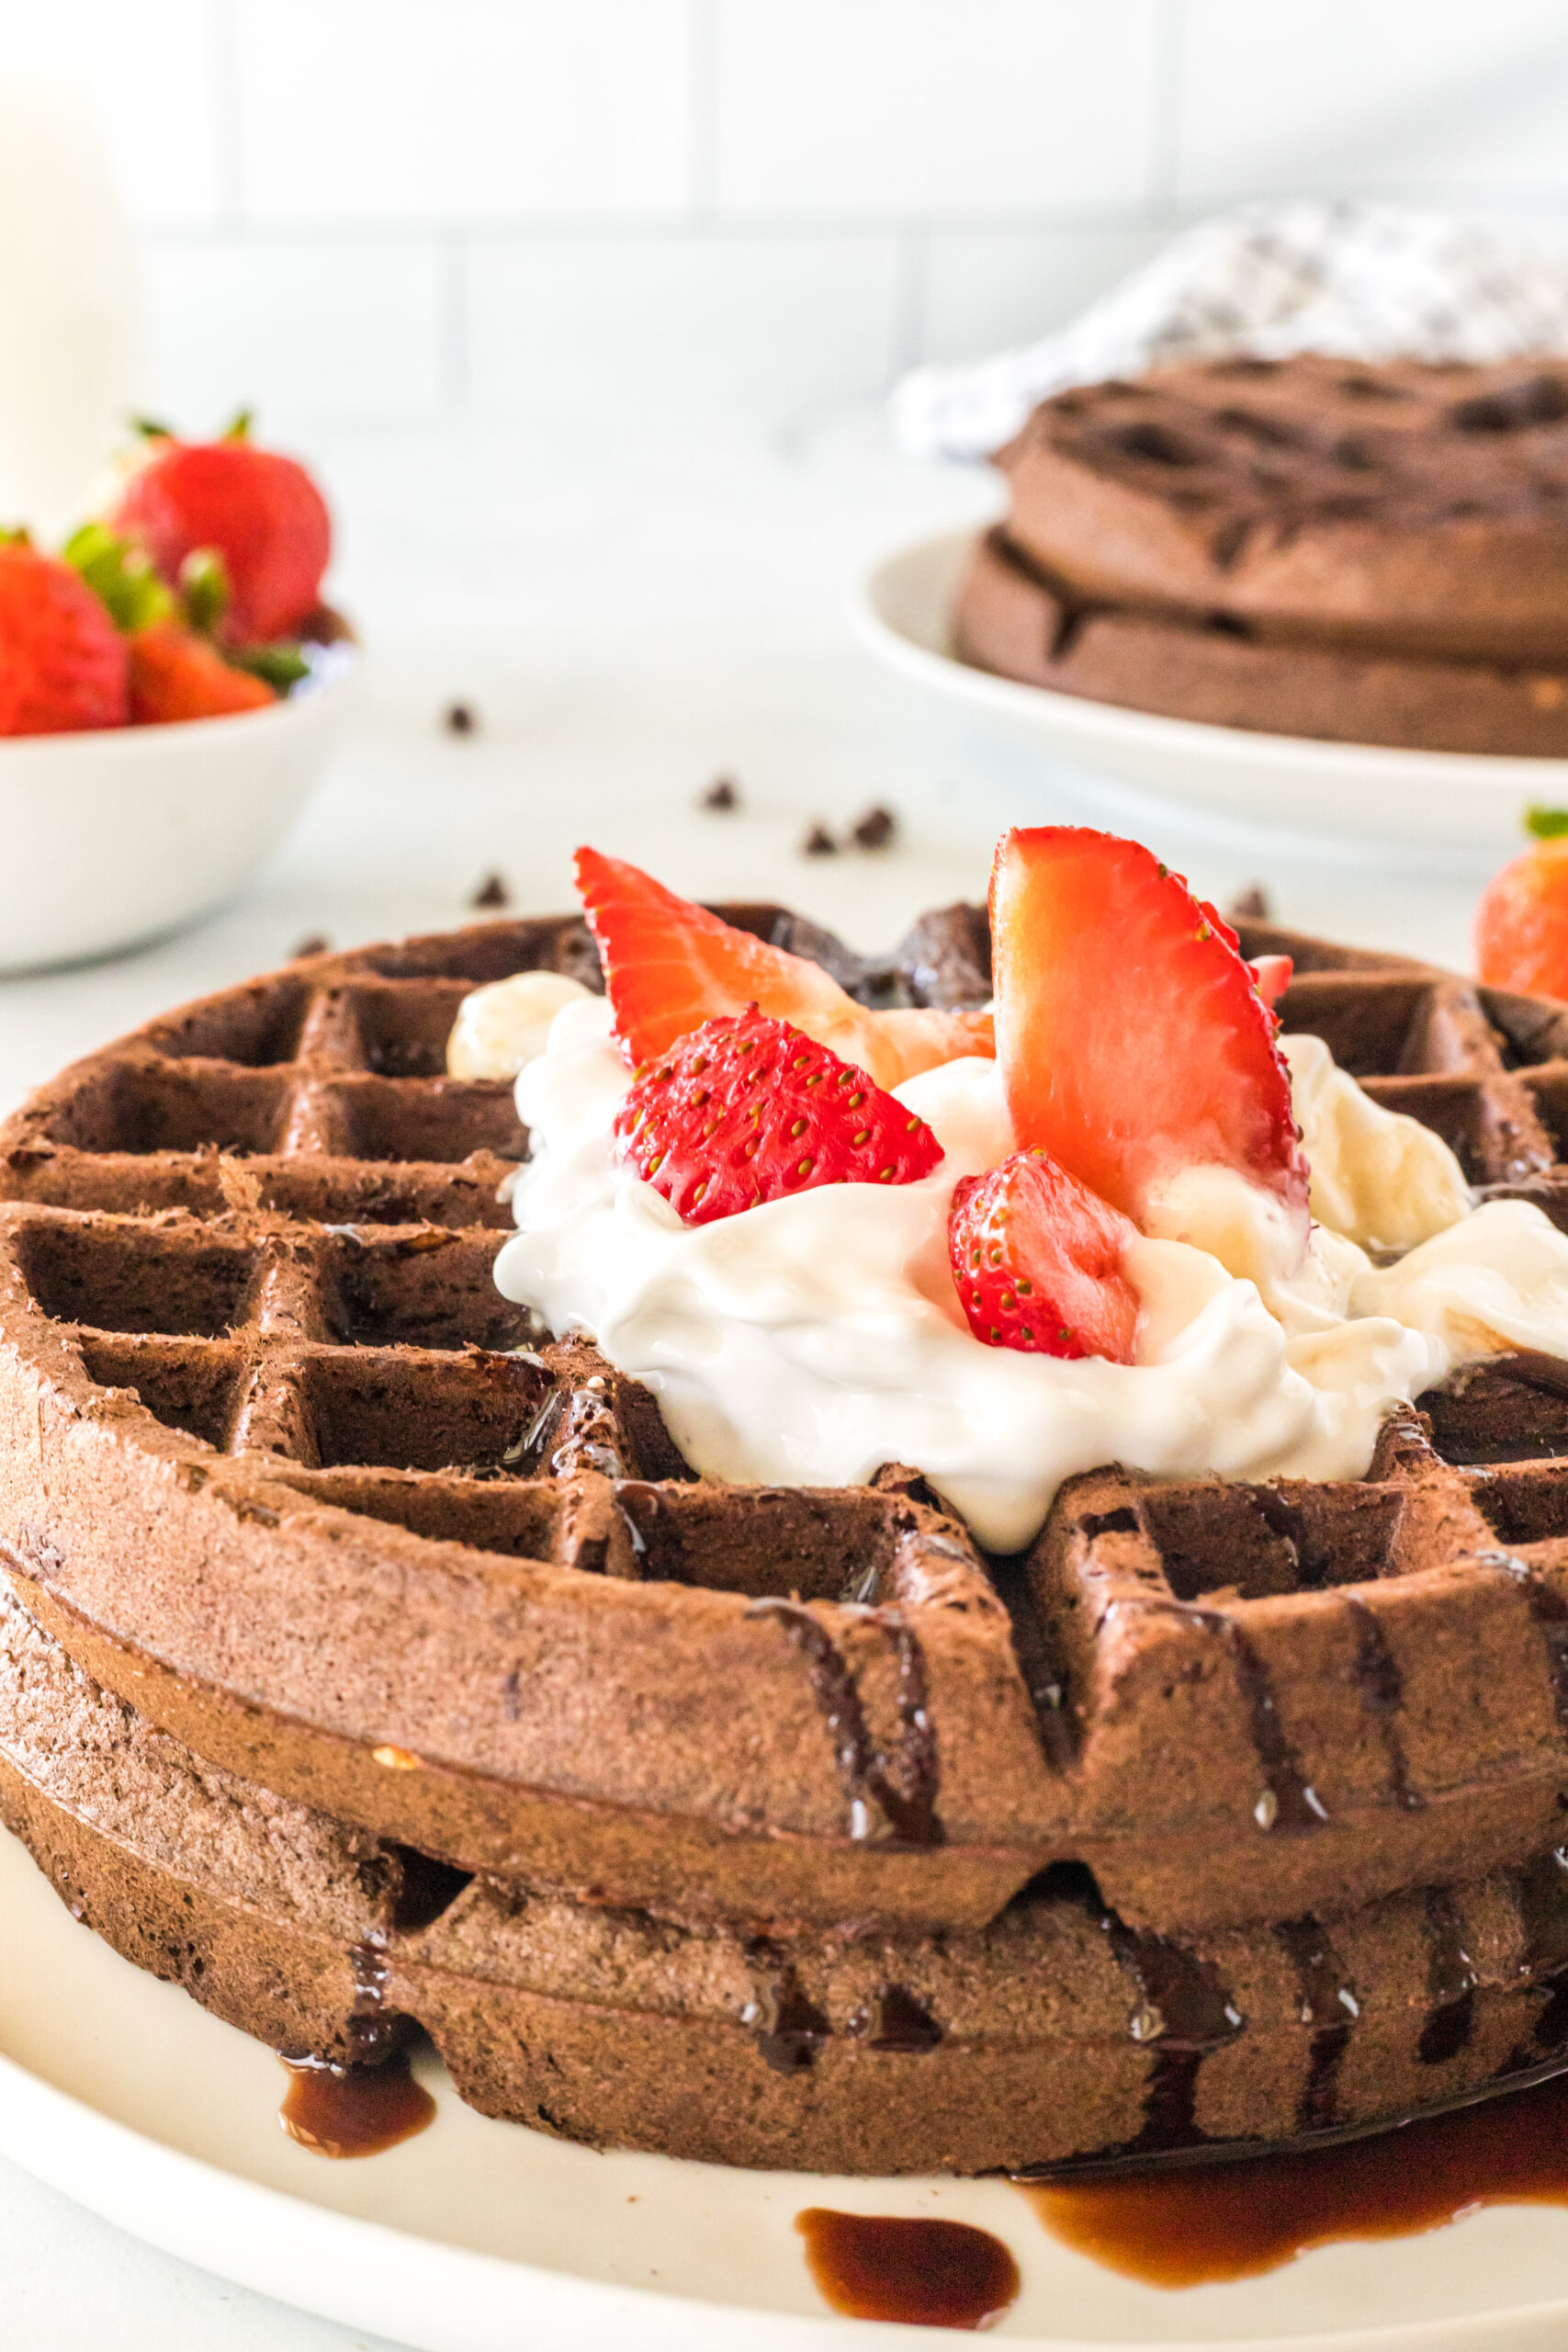 top side view of two chocolate waffles on plate with whipped cream and strawberries